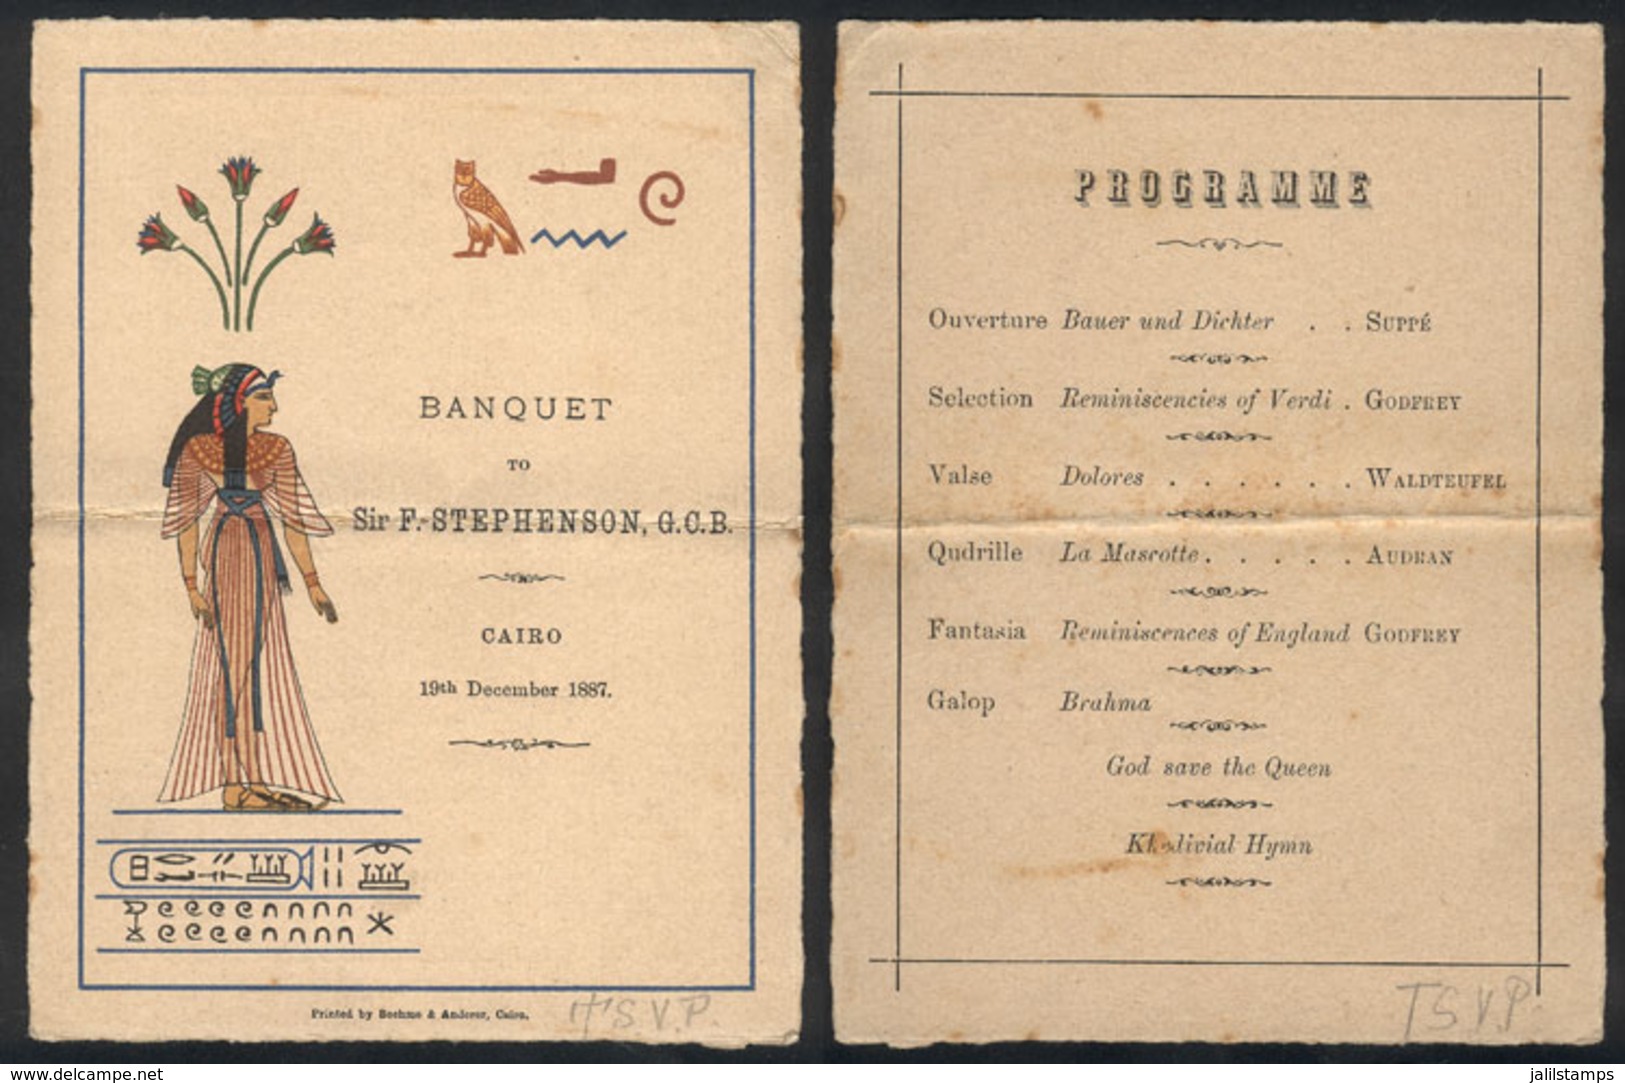 859 EGYPT: Programme Of The Banquet In Honor Of Gral. F. Stephenson In Cairo, 19 December - Programmes